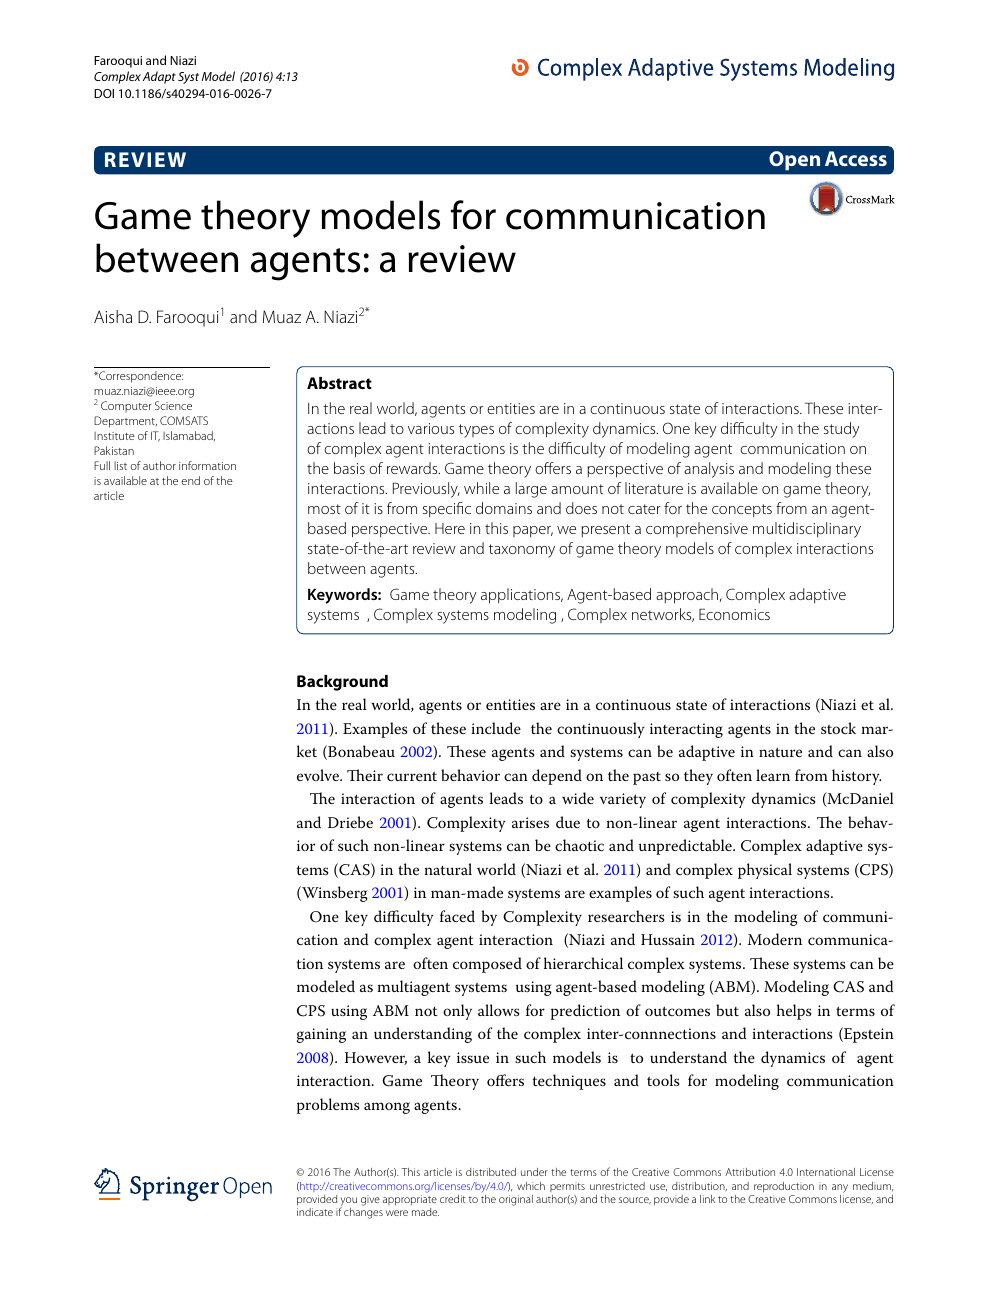 Game theory models for communication between agents: a review